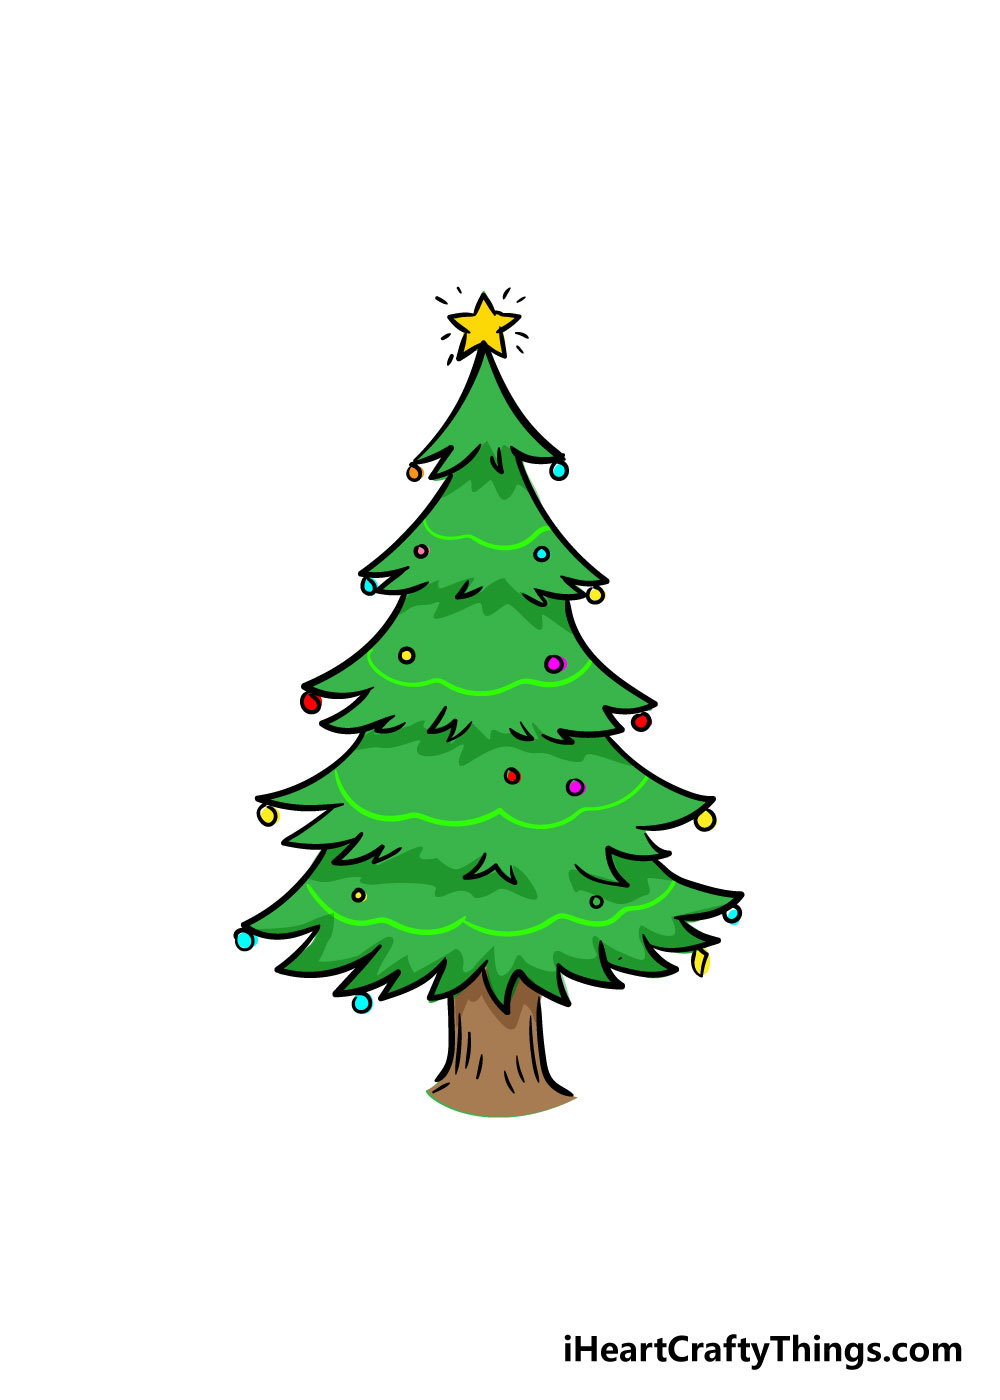 How to Draw A Christmas Tree – A Step by Step Guide